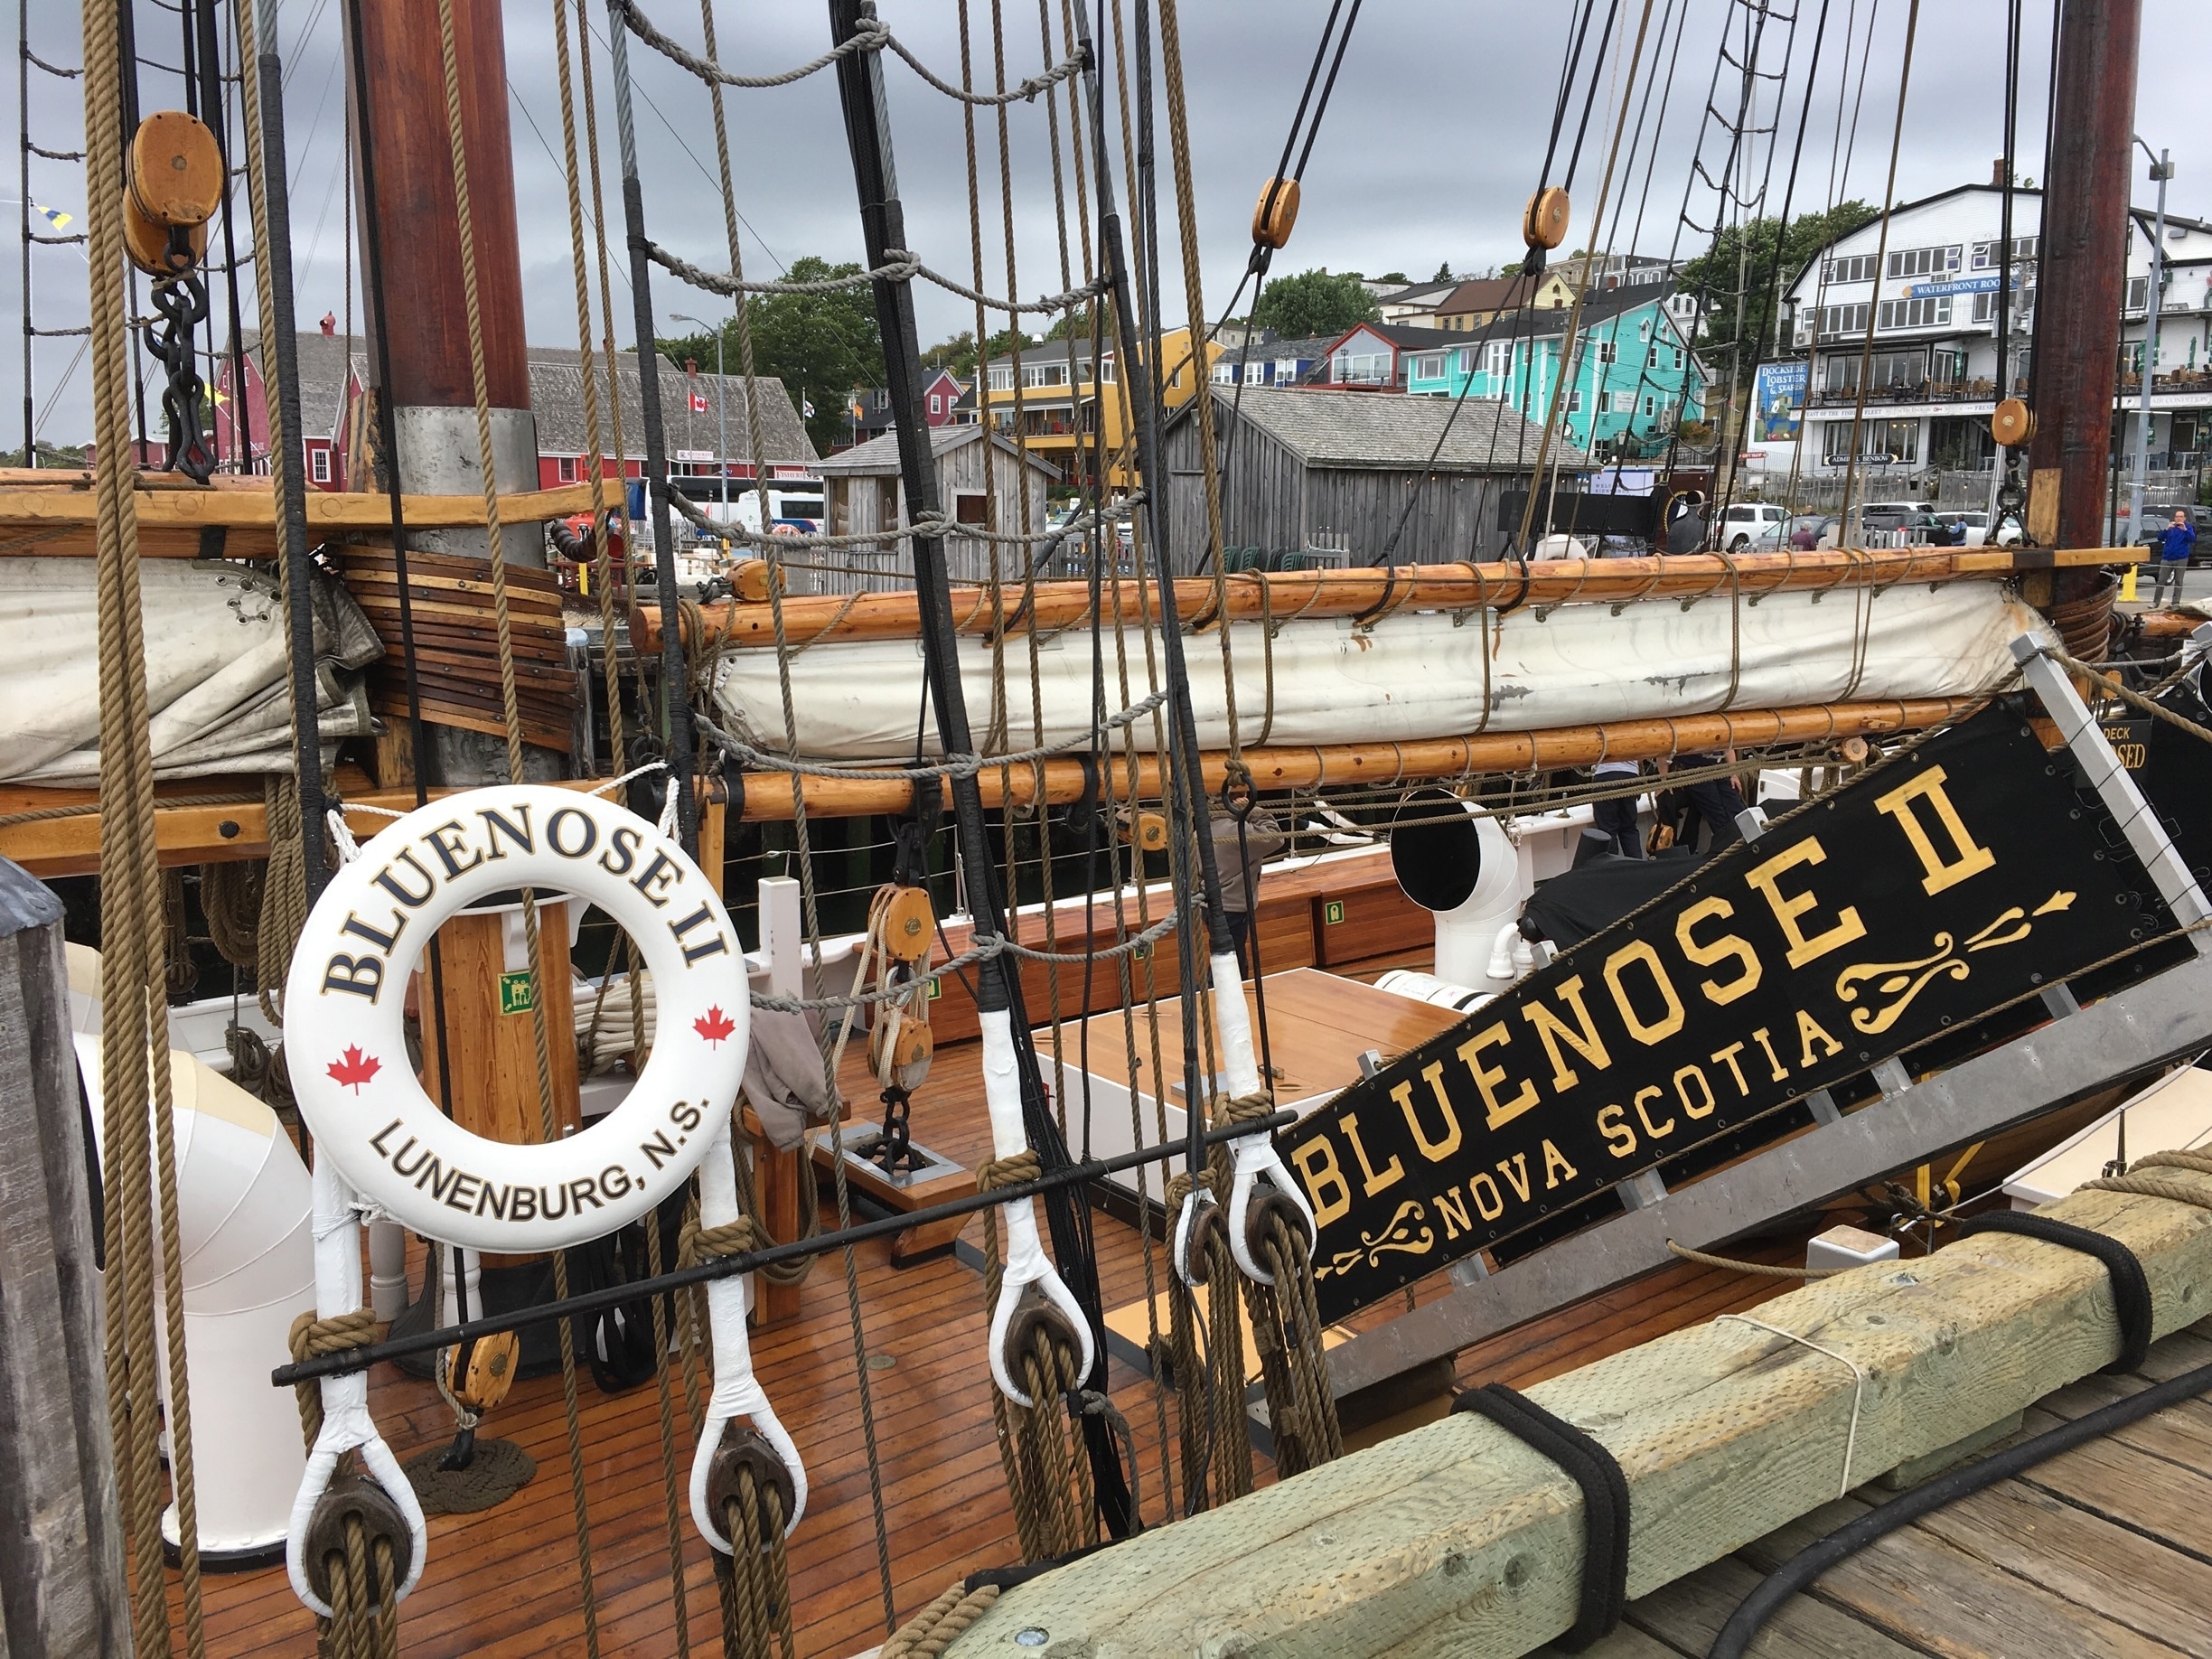 The Bluenose II was built in 1963 and reconstructed in 2012. The original Bluenose was a Canadian racing ship that sank off the coast if Haiti.